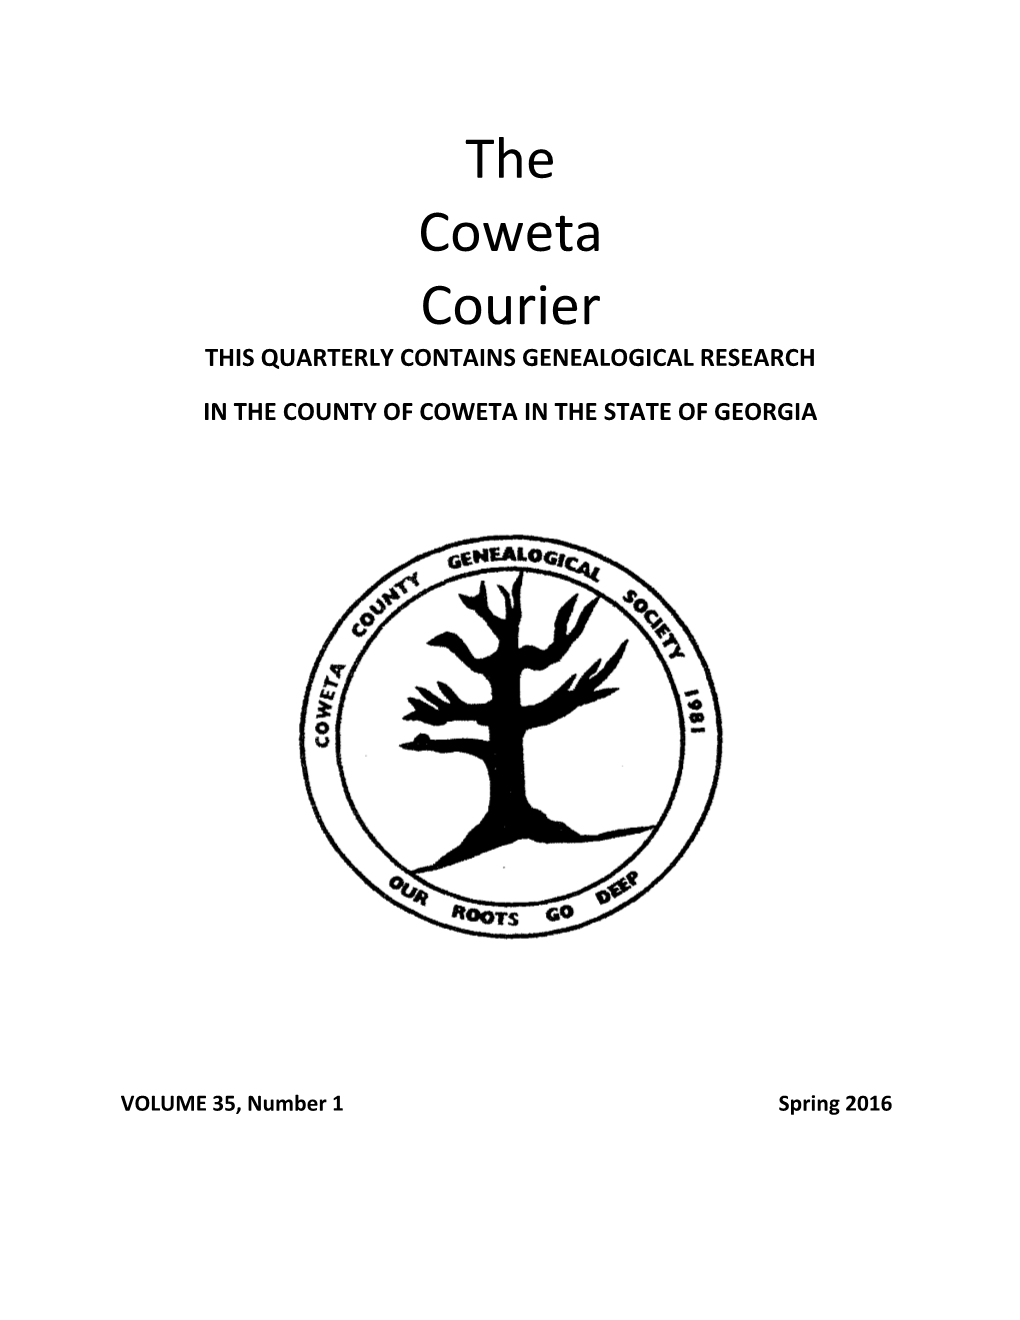 The Coweta Courier THIS QUARTERLY CONTAINS GENEALOGICAL RESEARCH